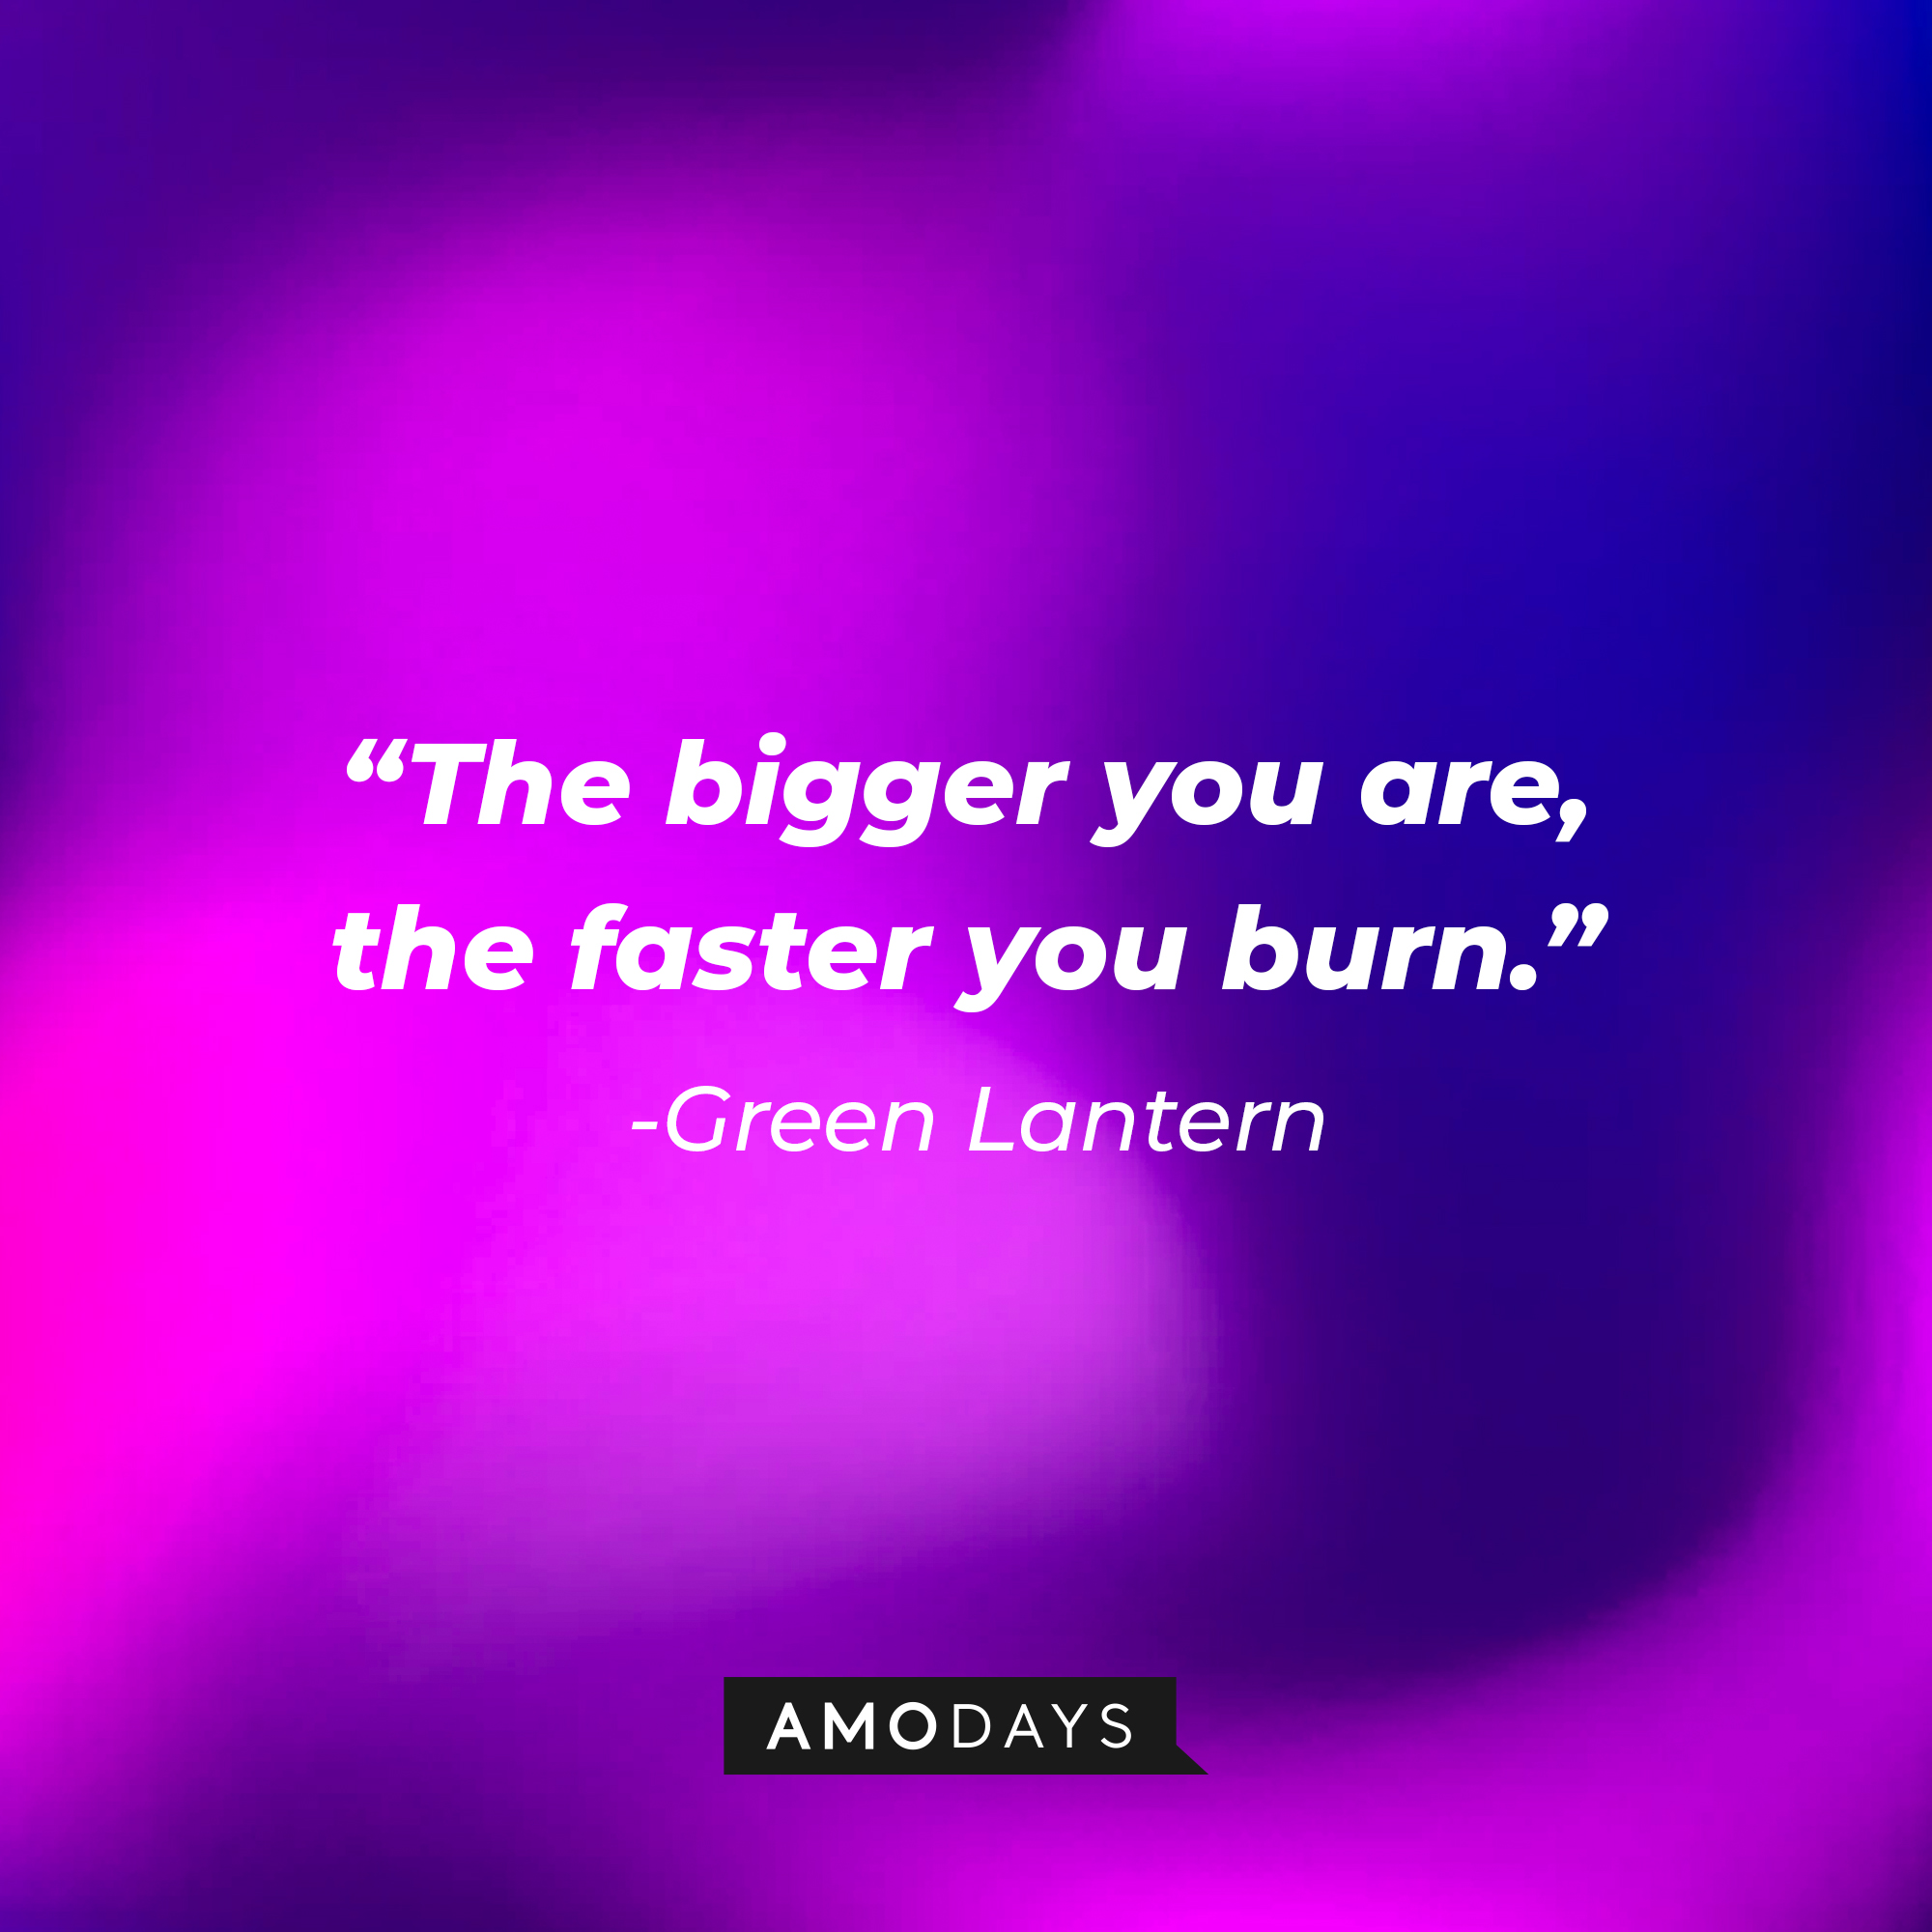 Green Lantern's quote: "The bigger you are, the faster you burn." | Source: AmoDays